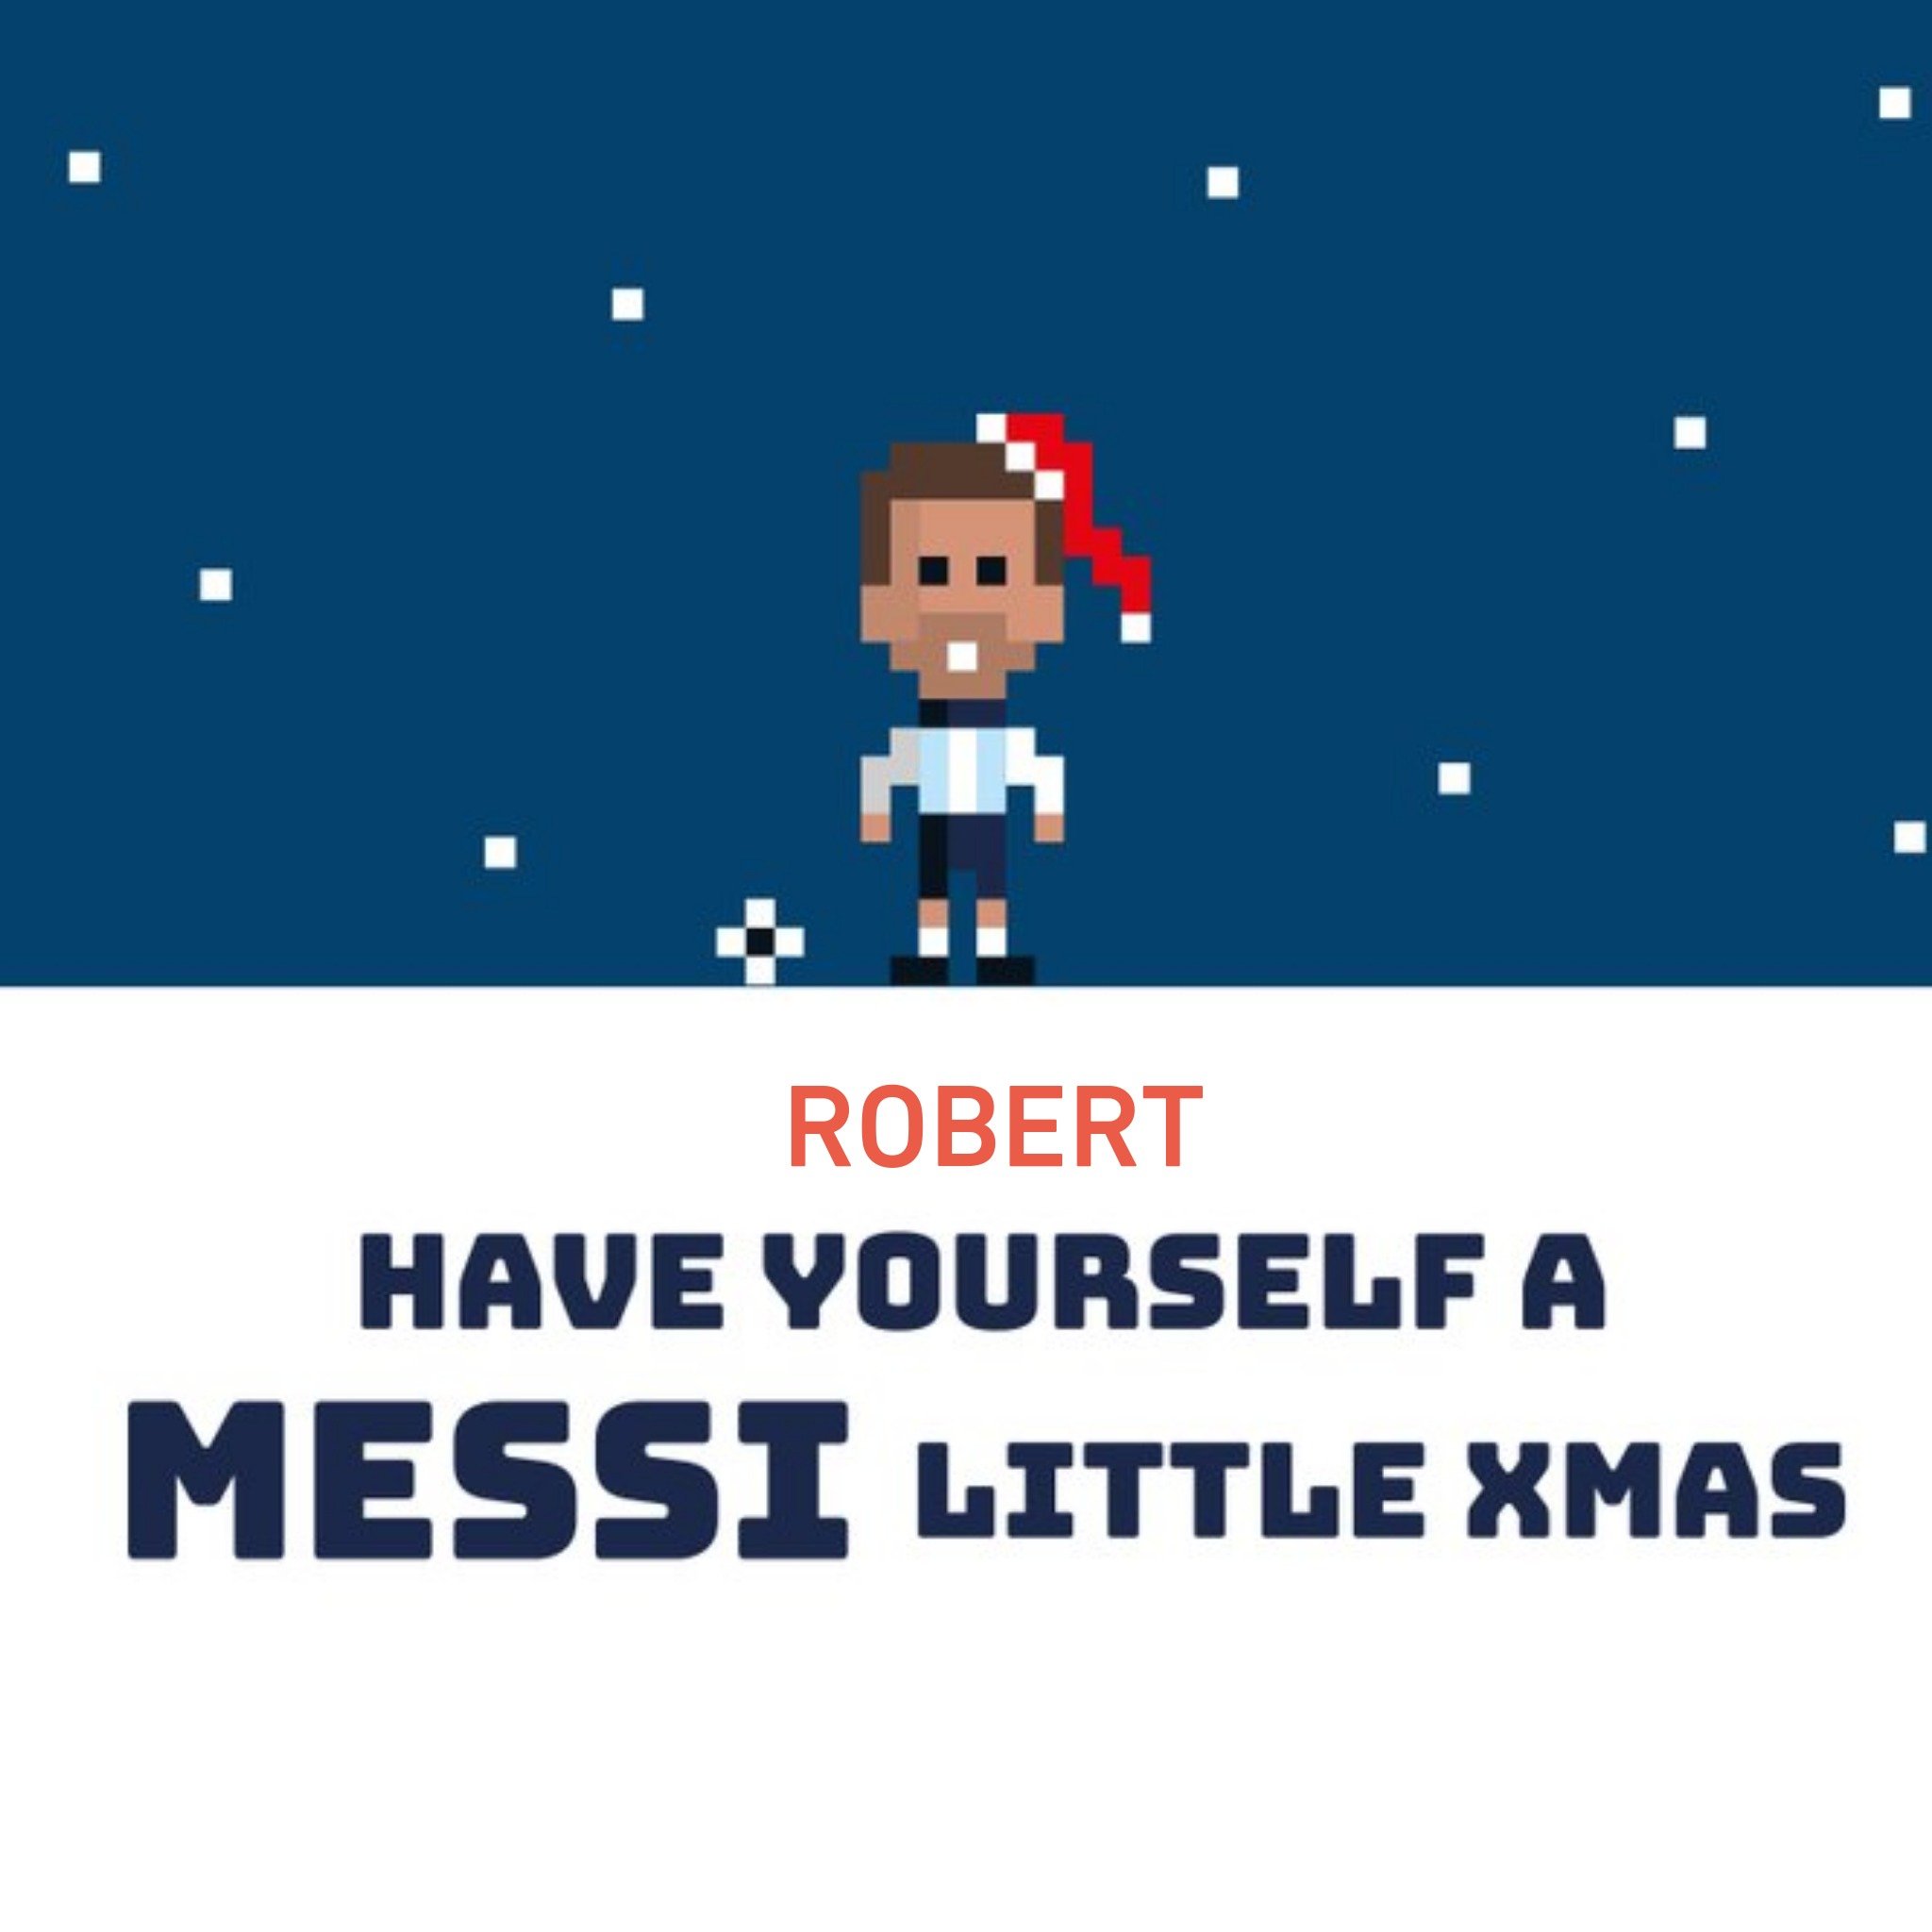 Moonpig Illustration Of A Footballer With A Santa Hat Funny Pun Football Christmas Card, Square